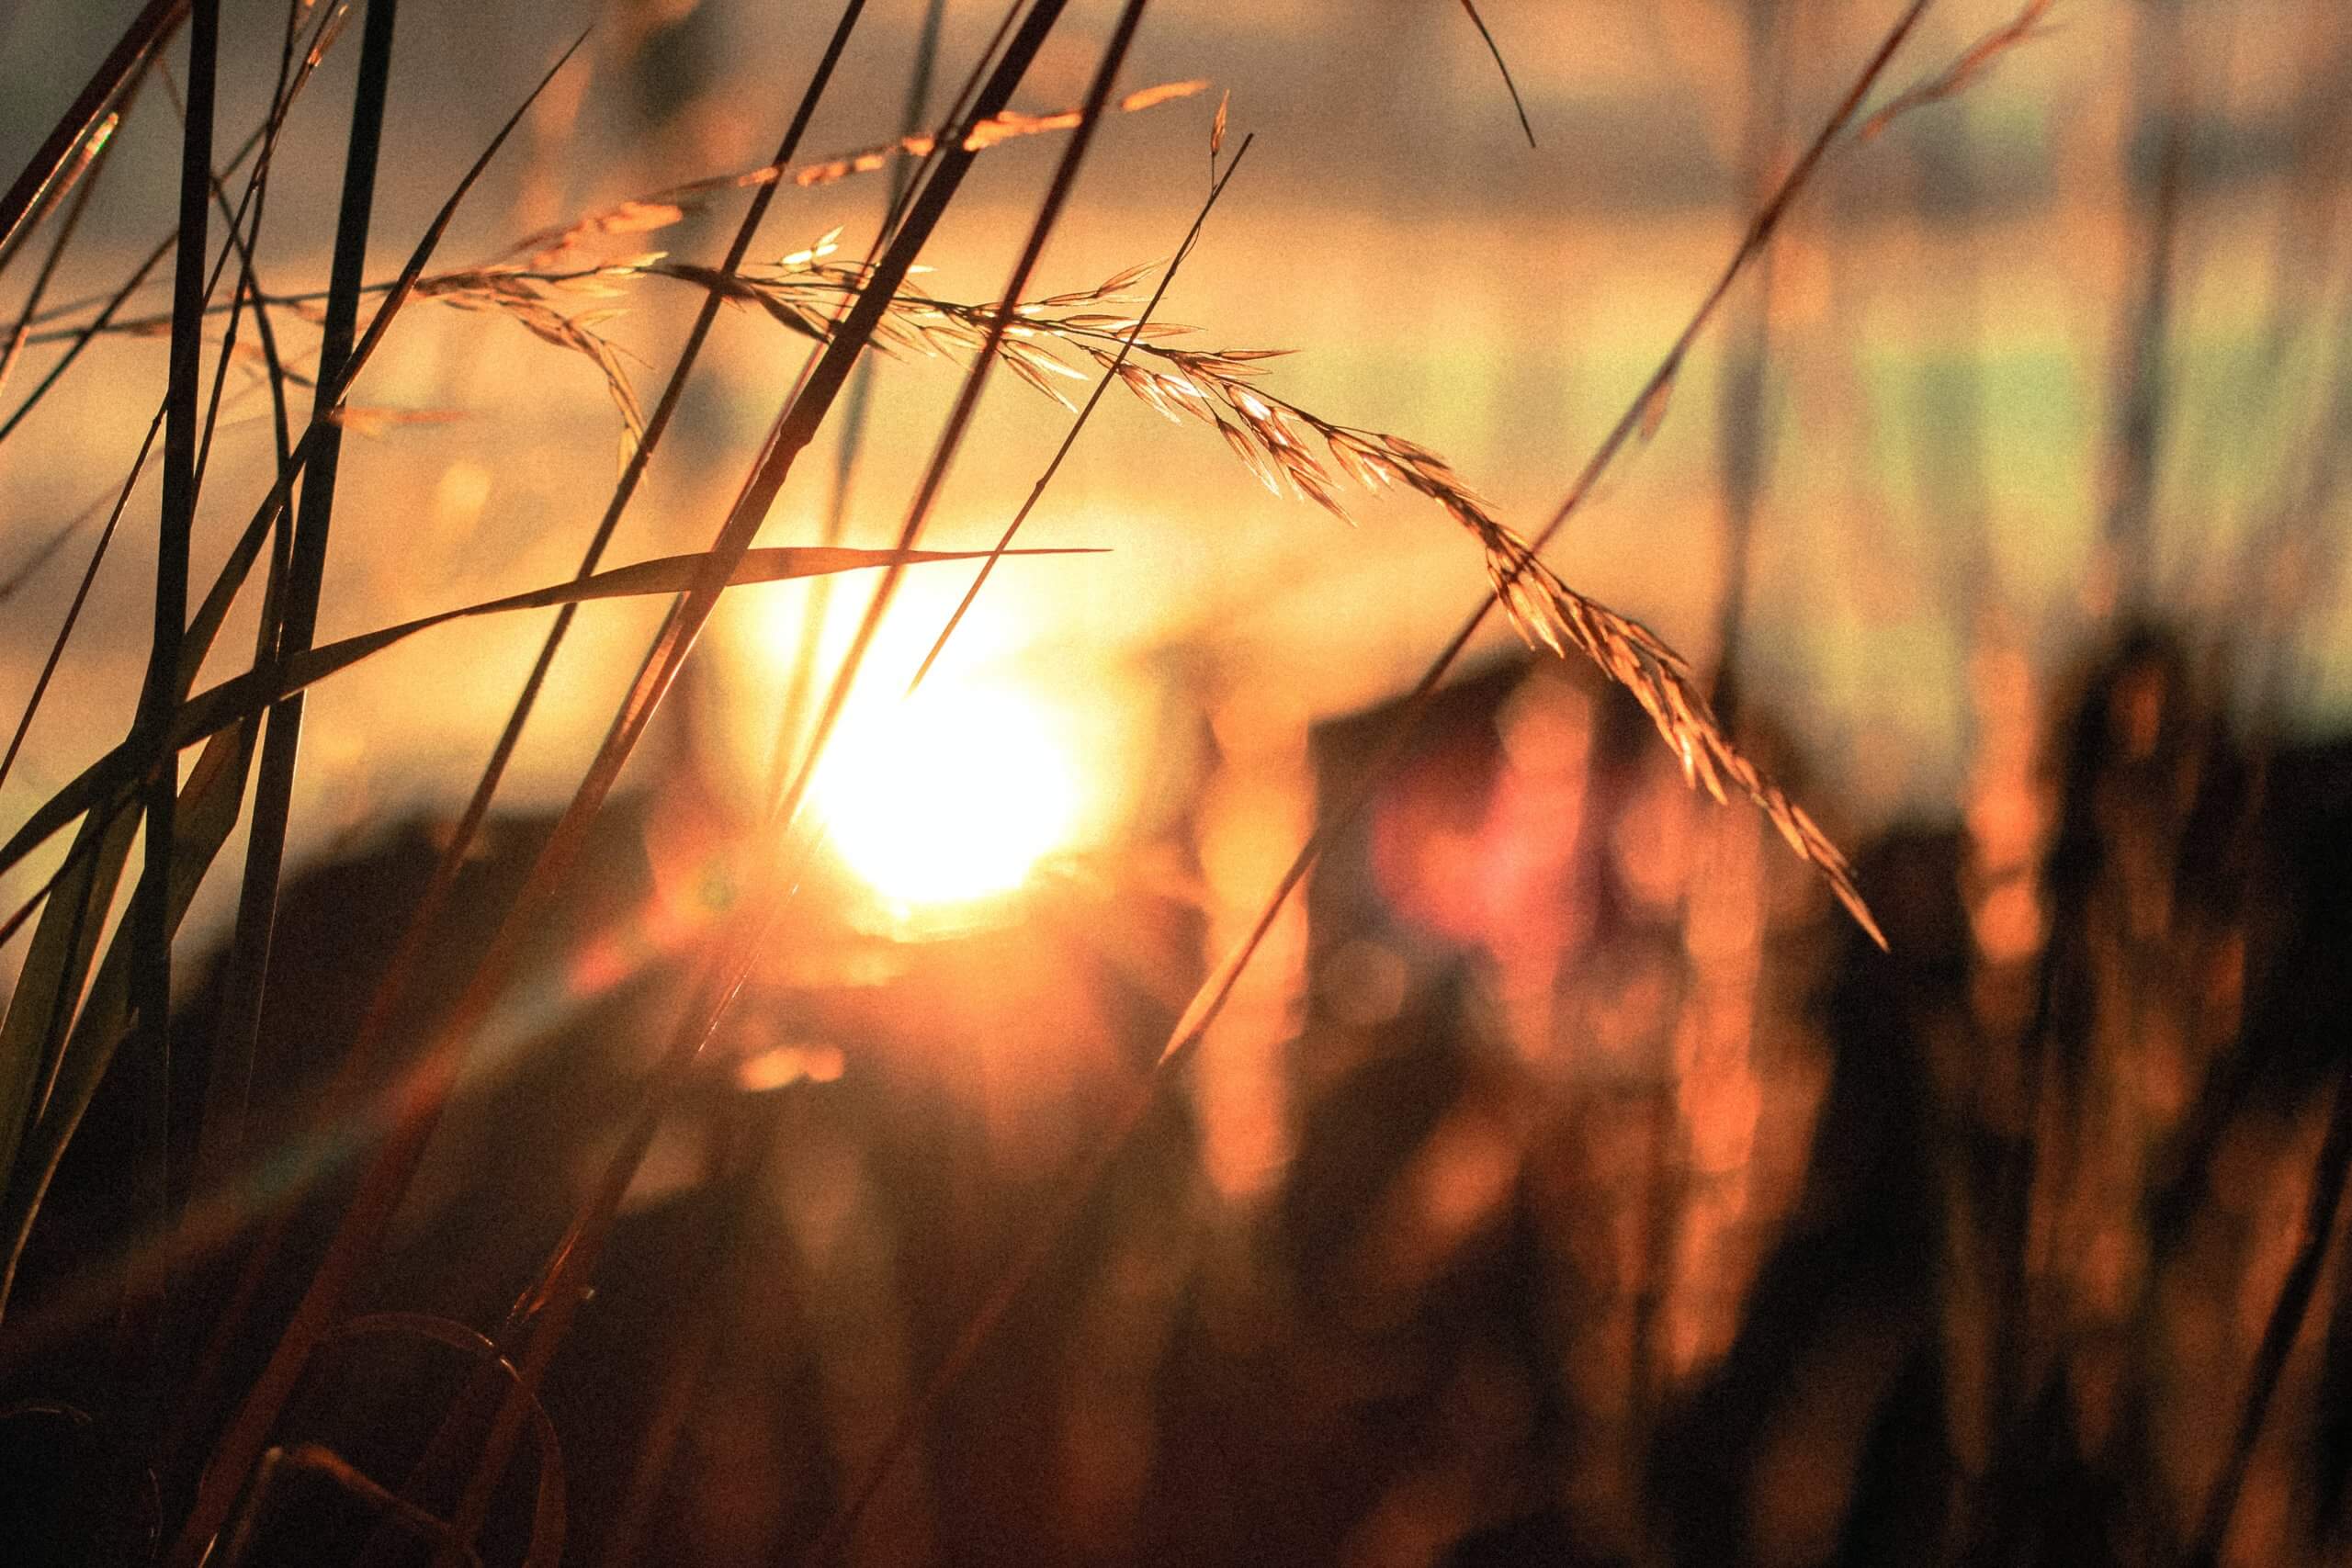 The sun, low in the sky, with golden grass in the foreground.